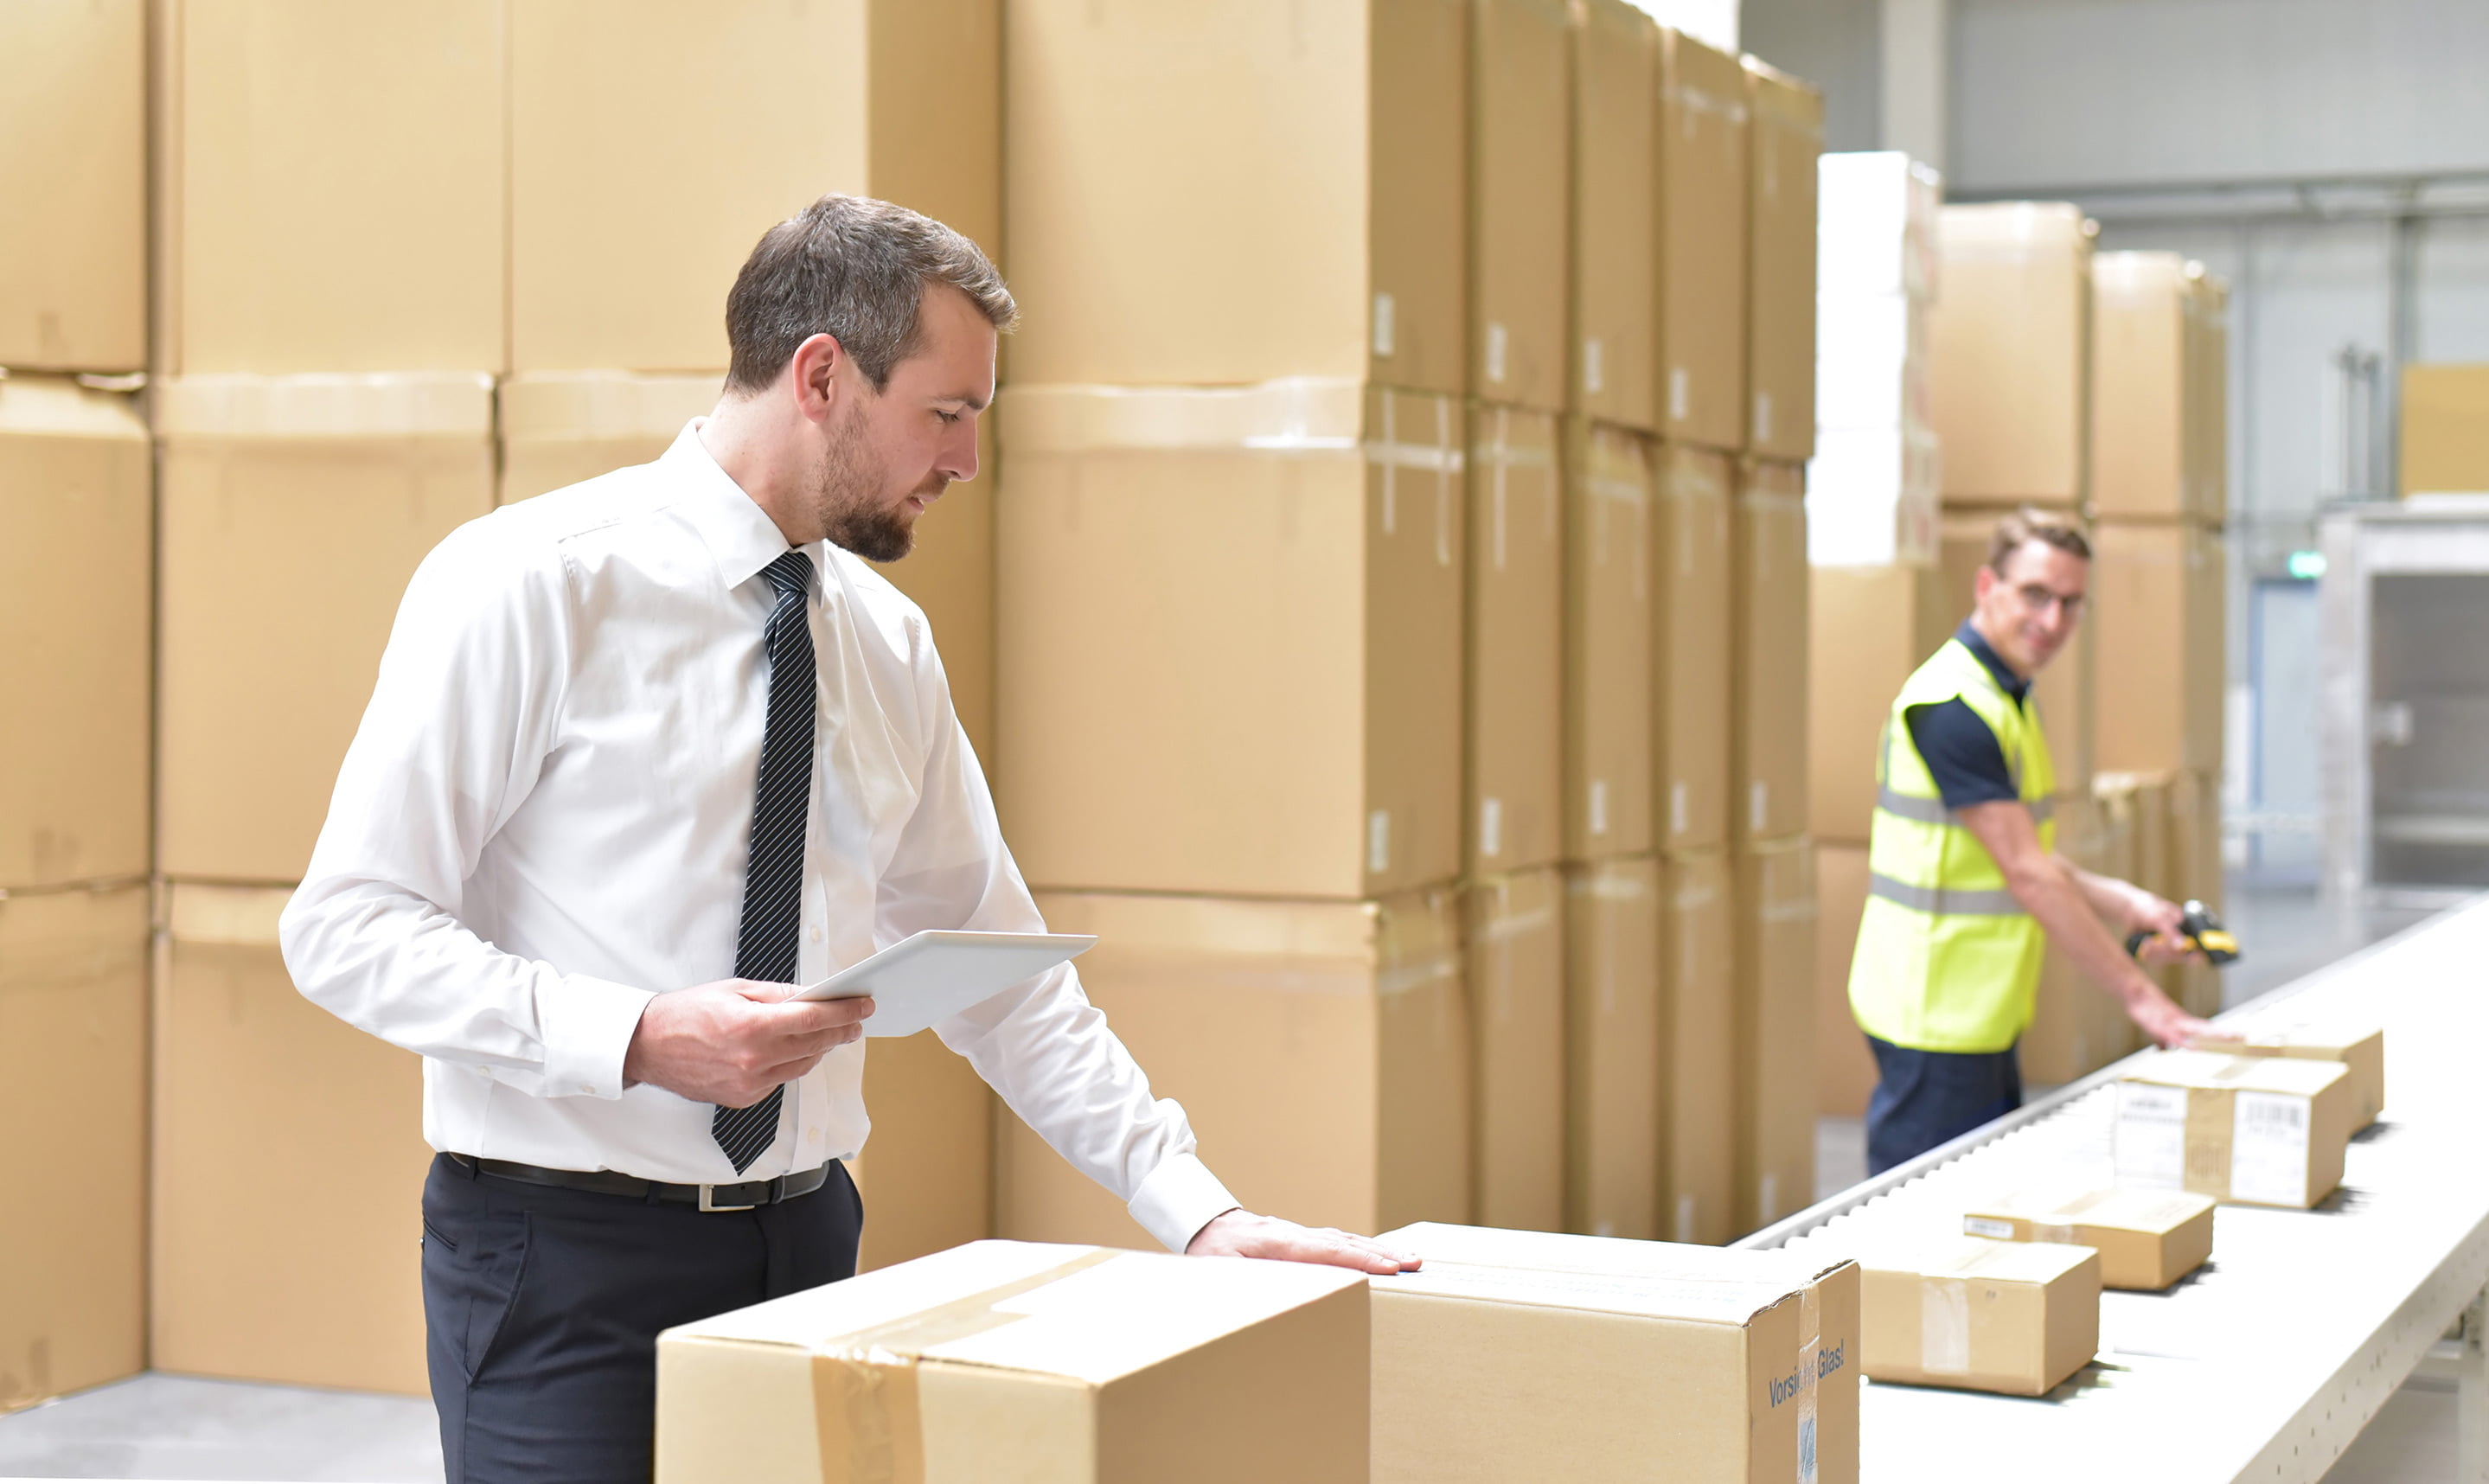 Always in control of your warehouse process